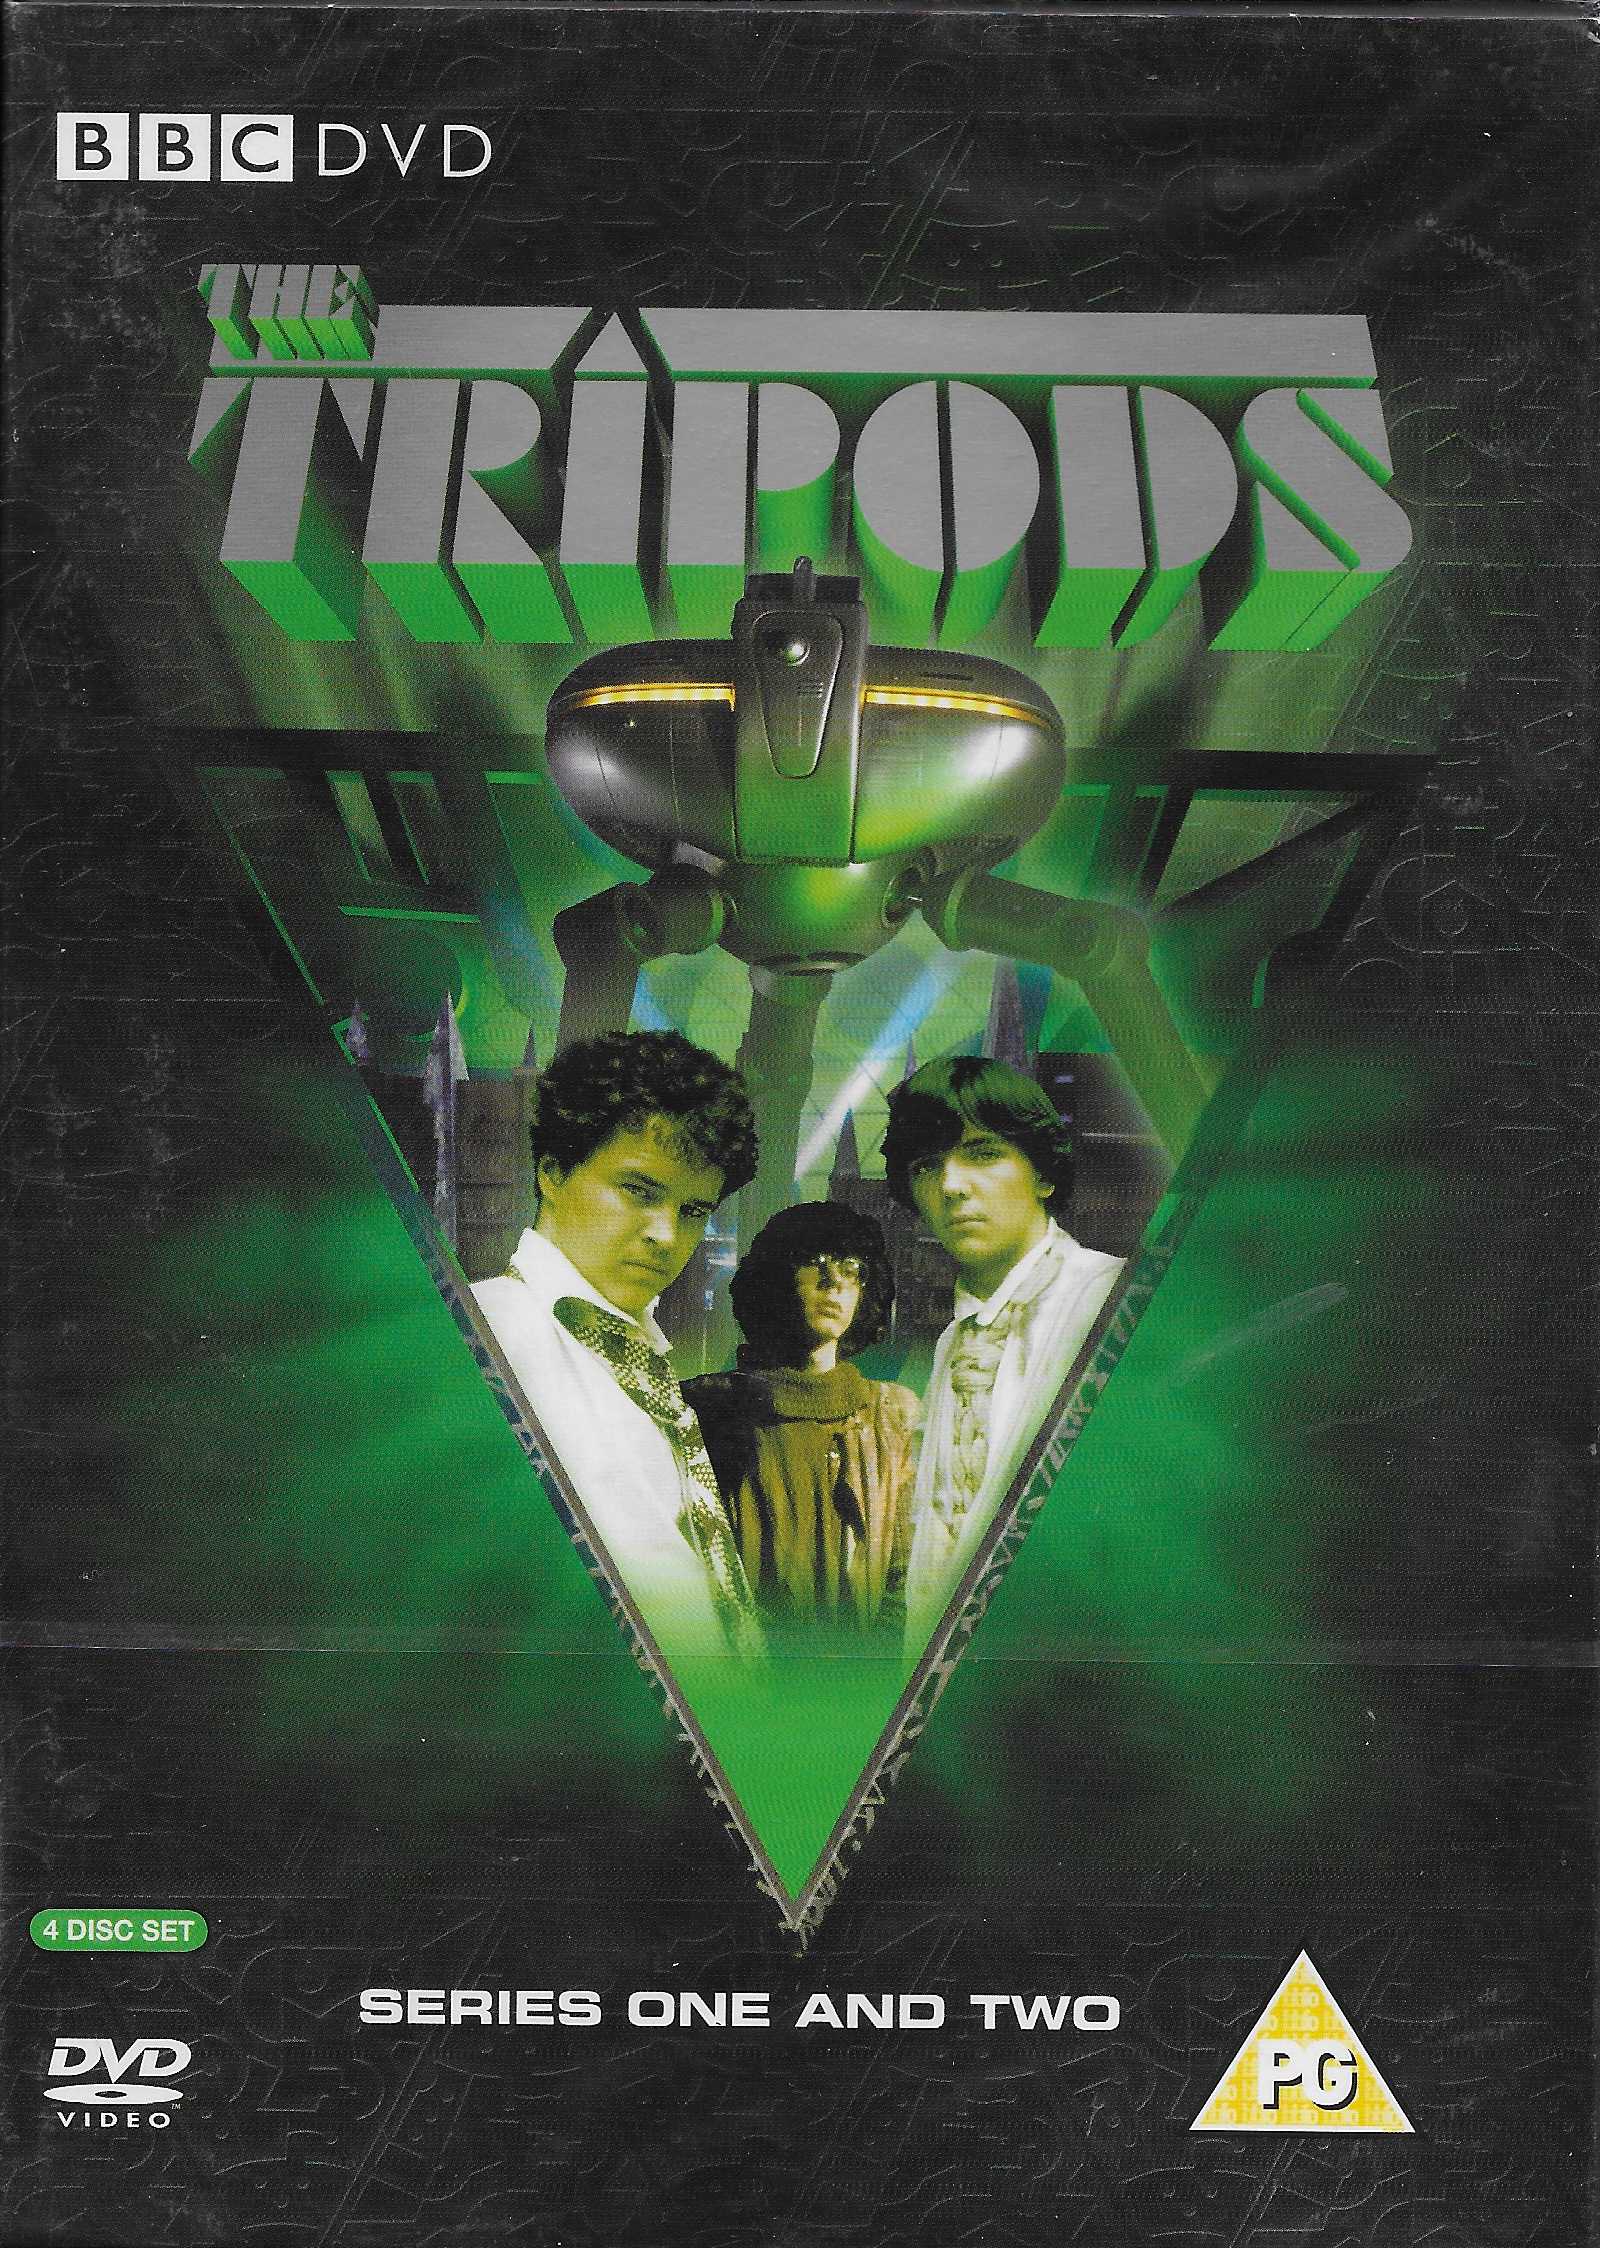 Picture of BBCDVD 2488 The tripods - Series one and two by artist Alick Rowe / Christopher Penfold from the BBC dvds - Records and Tapes library